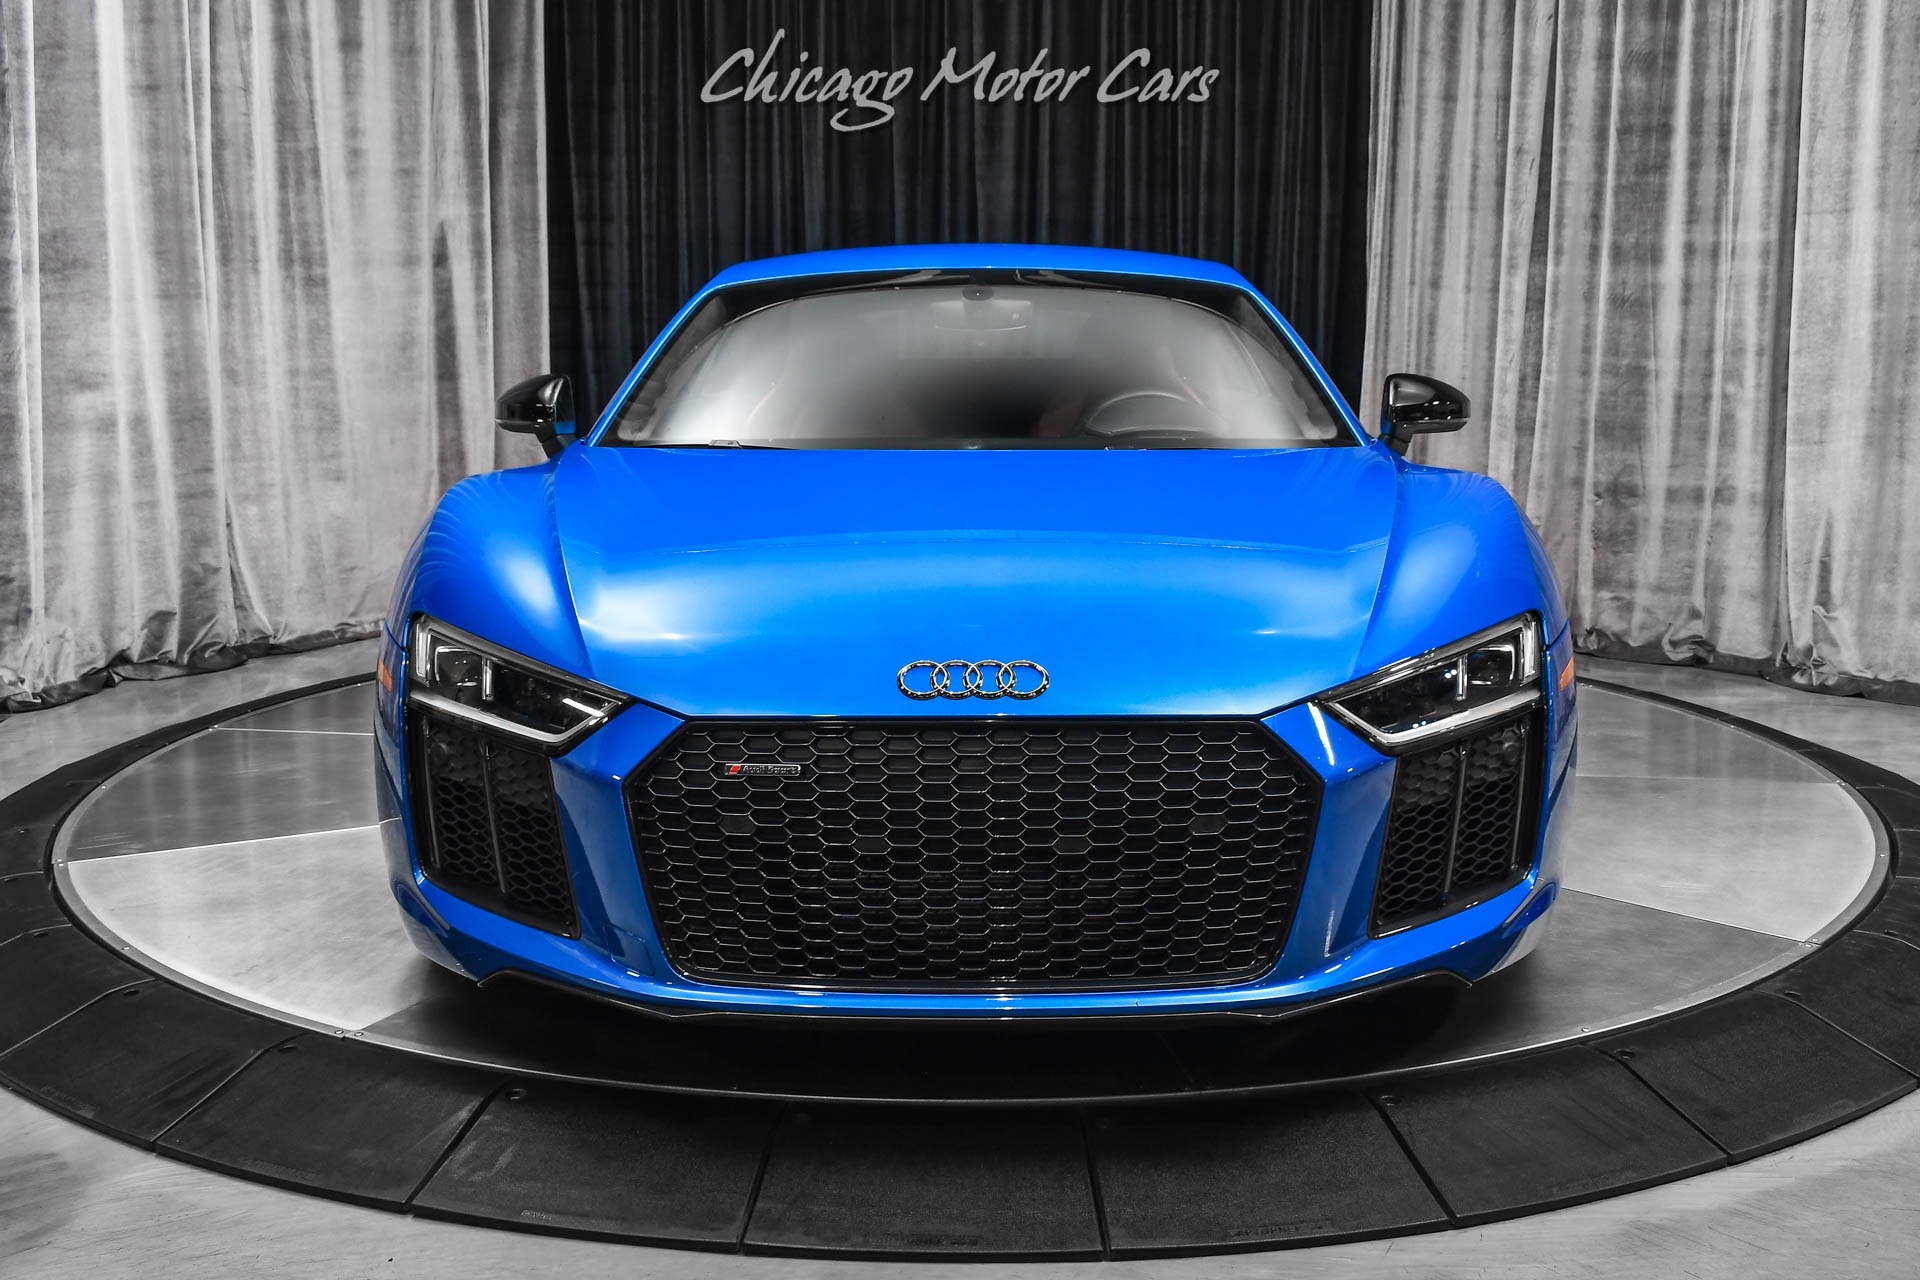 Used-2018-Audi-R8-52-V10-RWS-Coupe-Red-interior-LOADED-Premium-Pkg-Valved-Perf-Exhaust